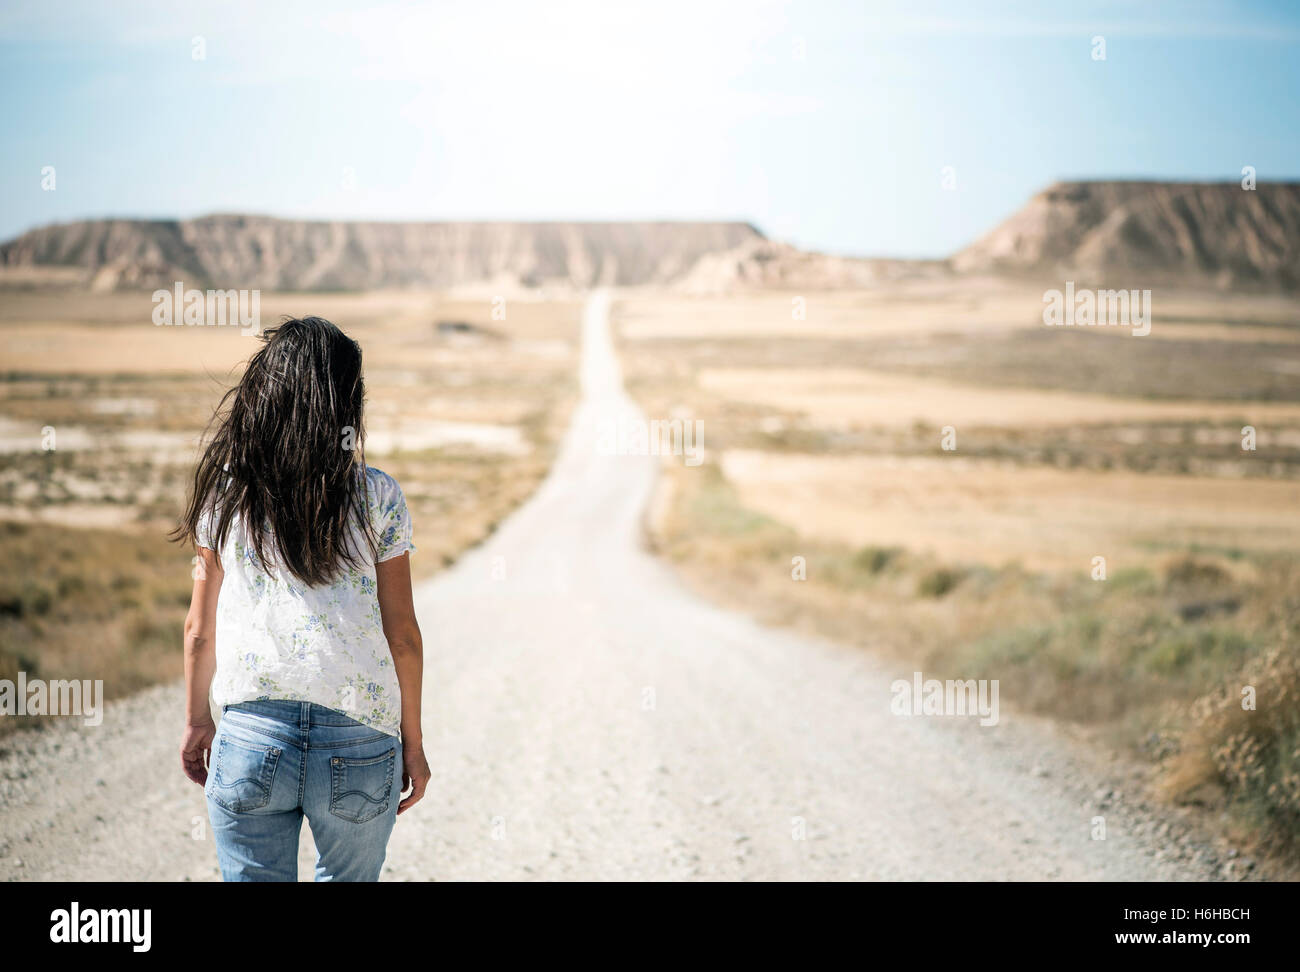 Woman walking on dirt road. Looking like a movie Stock Photo